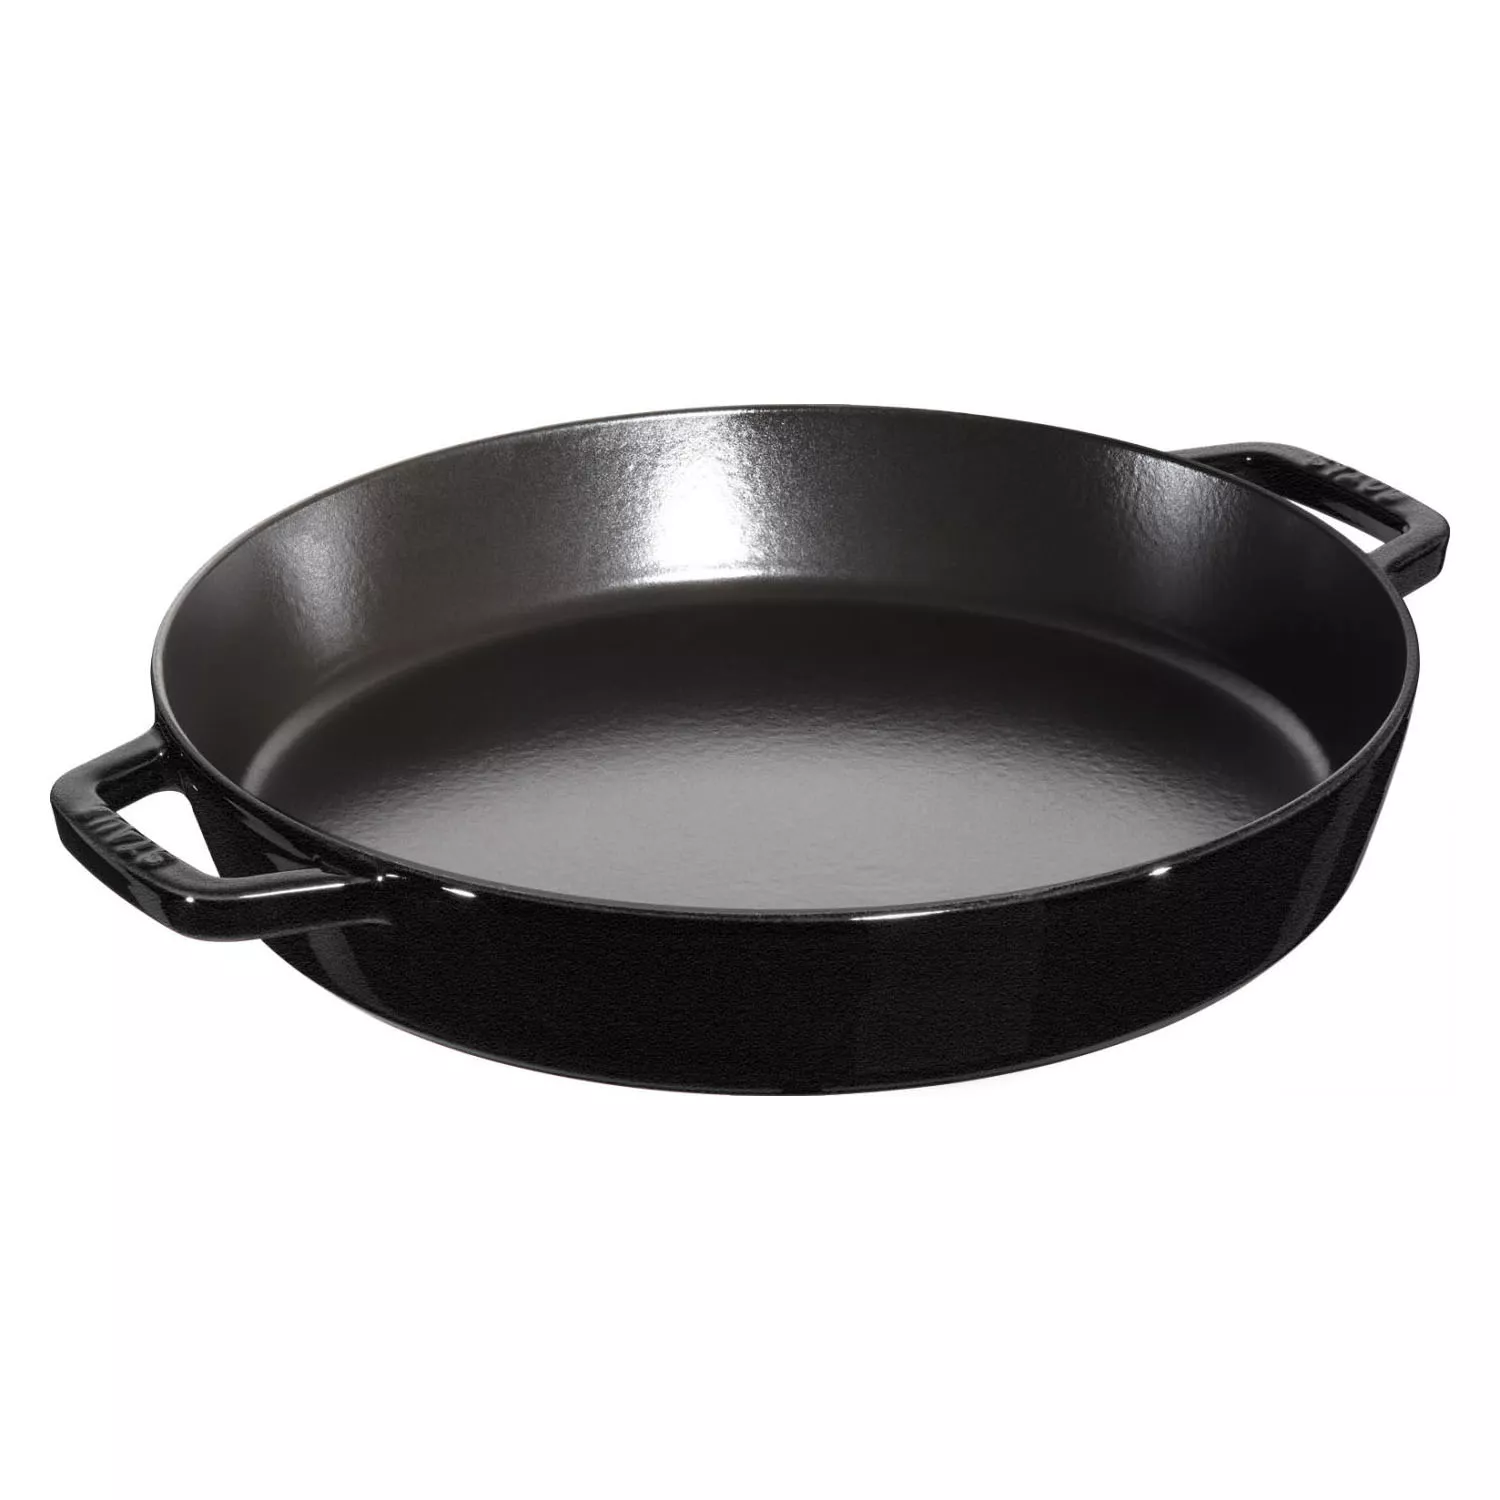 Staub Enameled Cast Iron Stackable Double-Handle Fry Pan